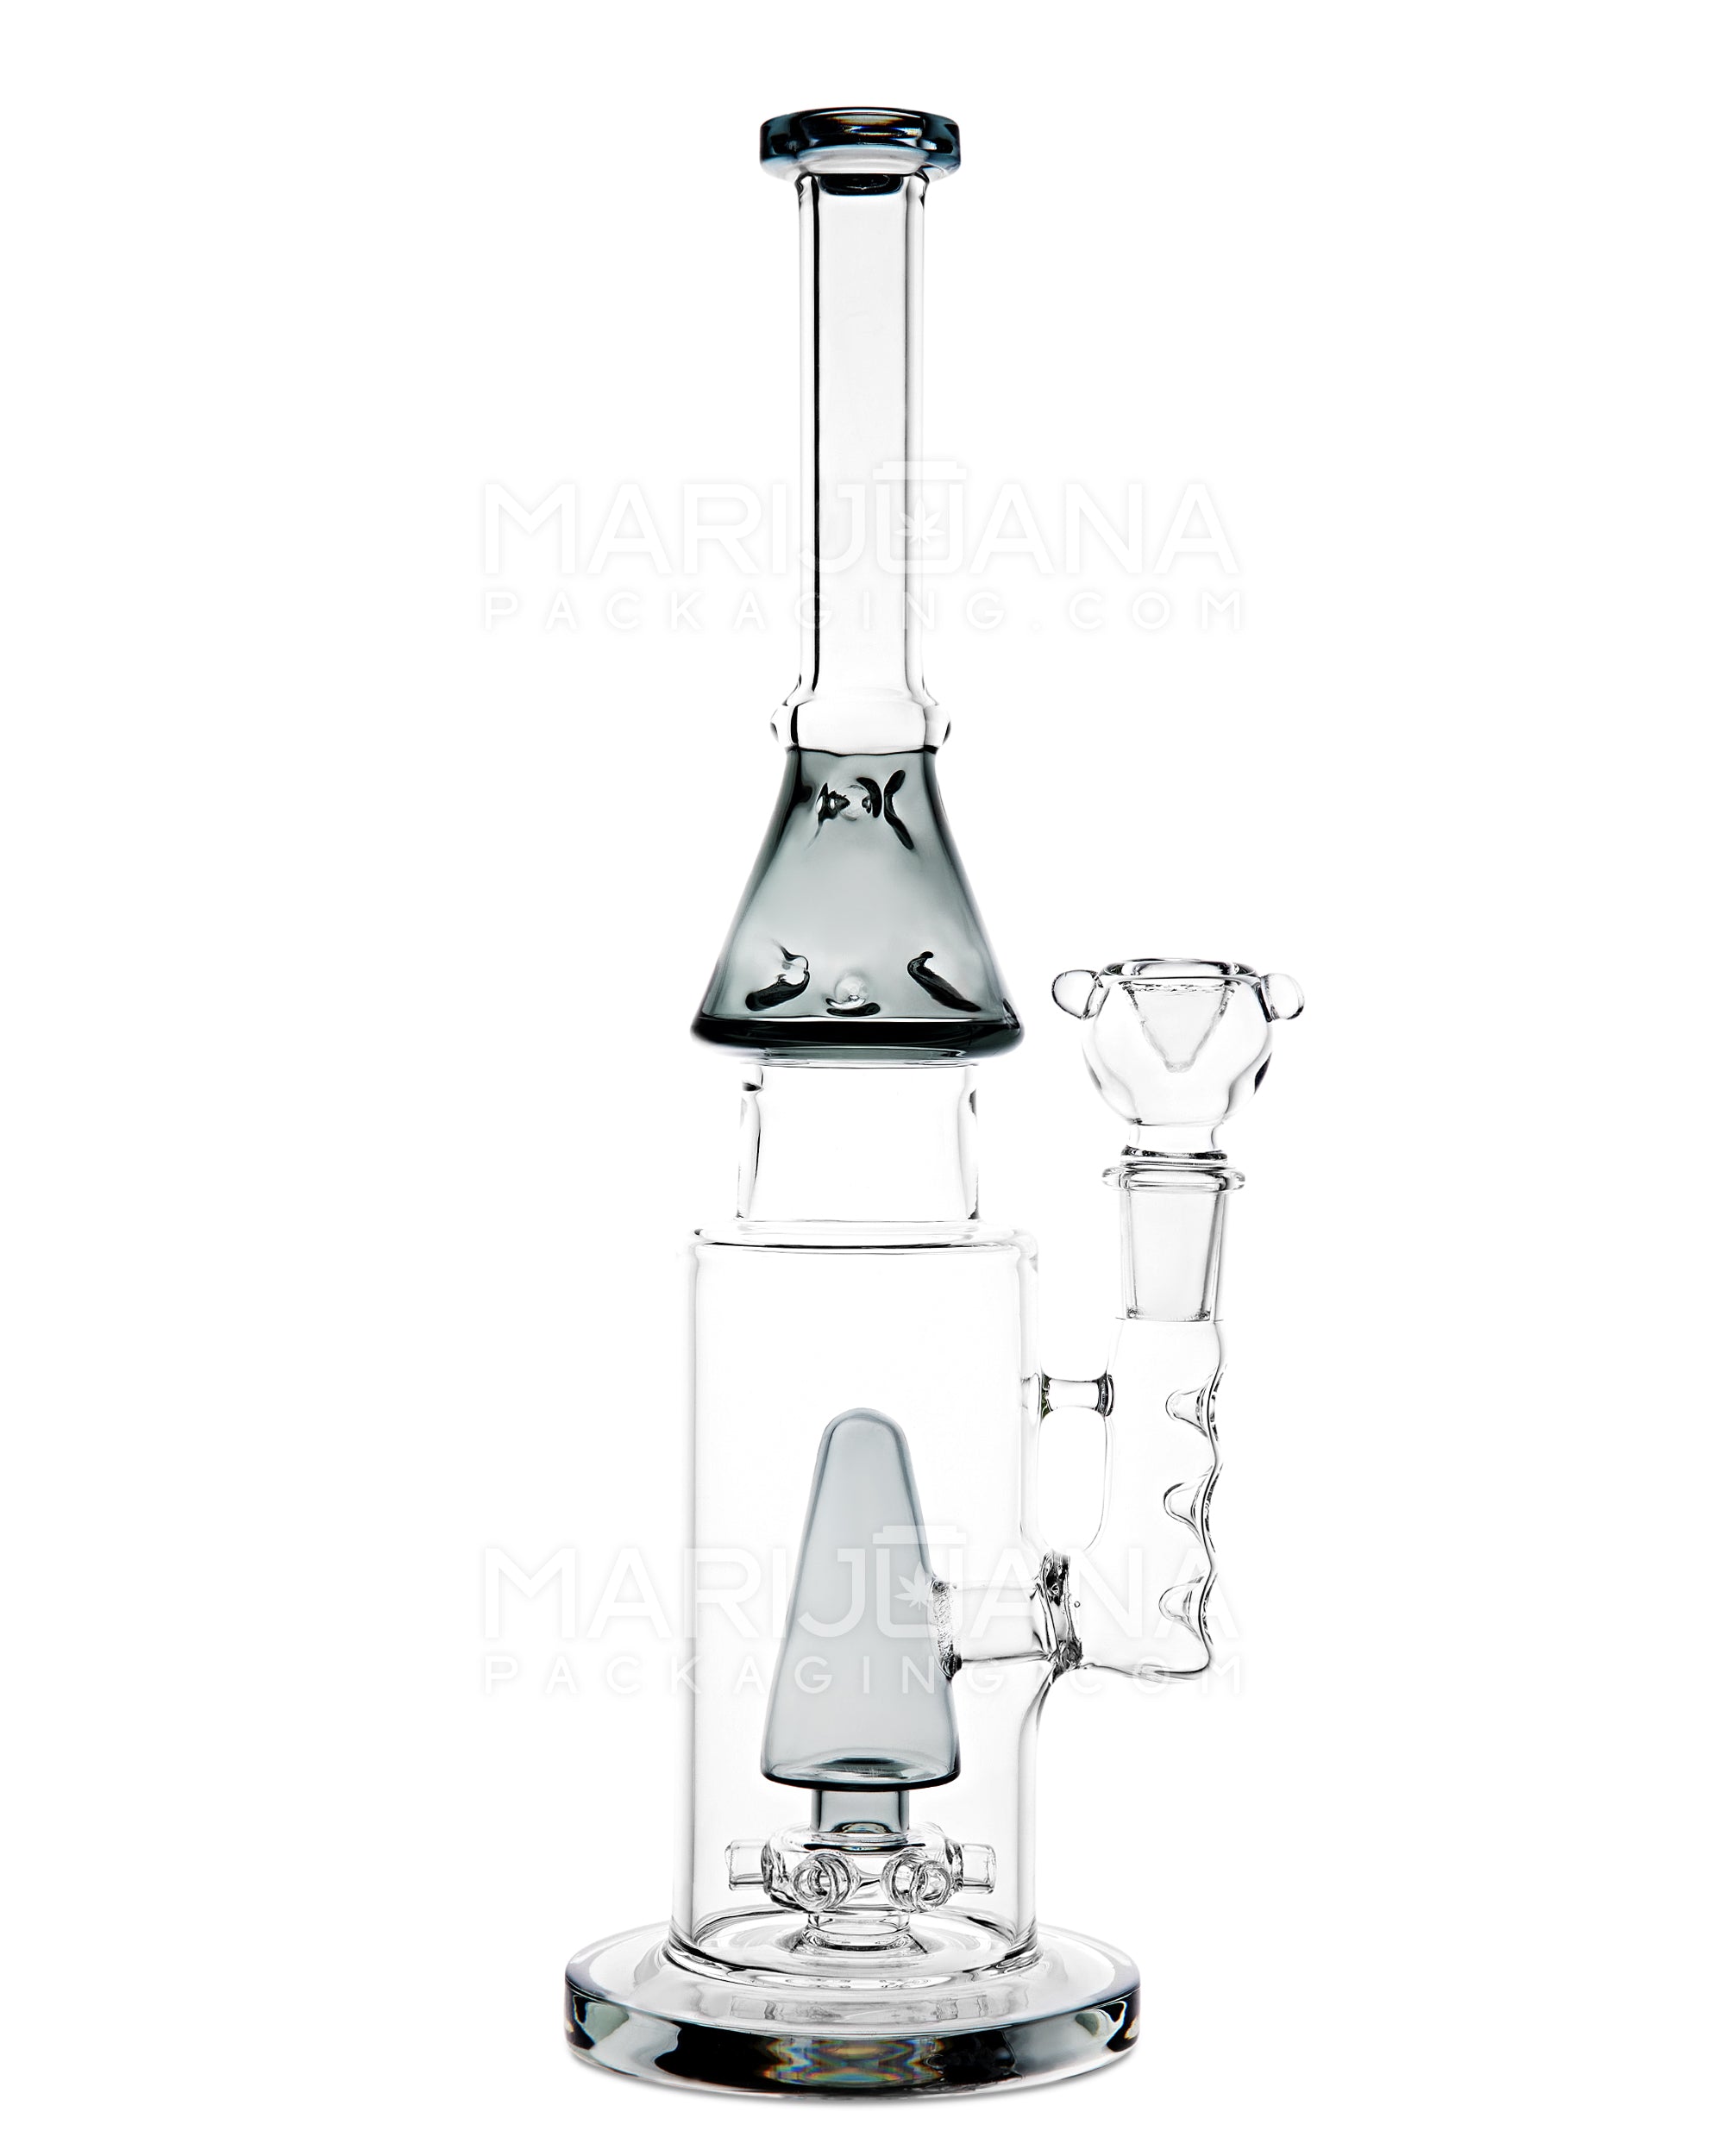 Straight Neck Showerhead Perc Glass Water Pipe w/ Ice Catcher & Thick Base | 15in Tall - 18mm Bowl - Black - 1